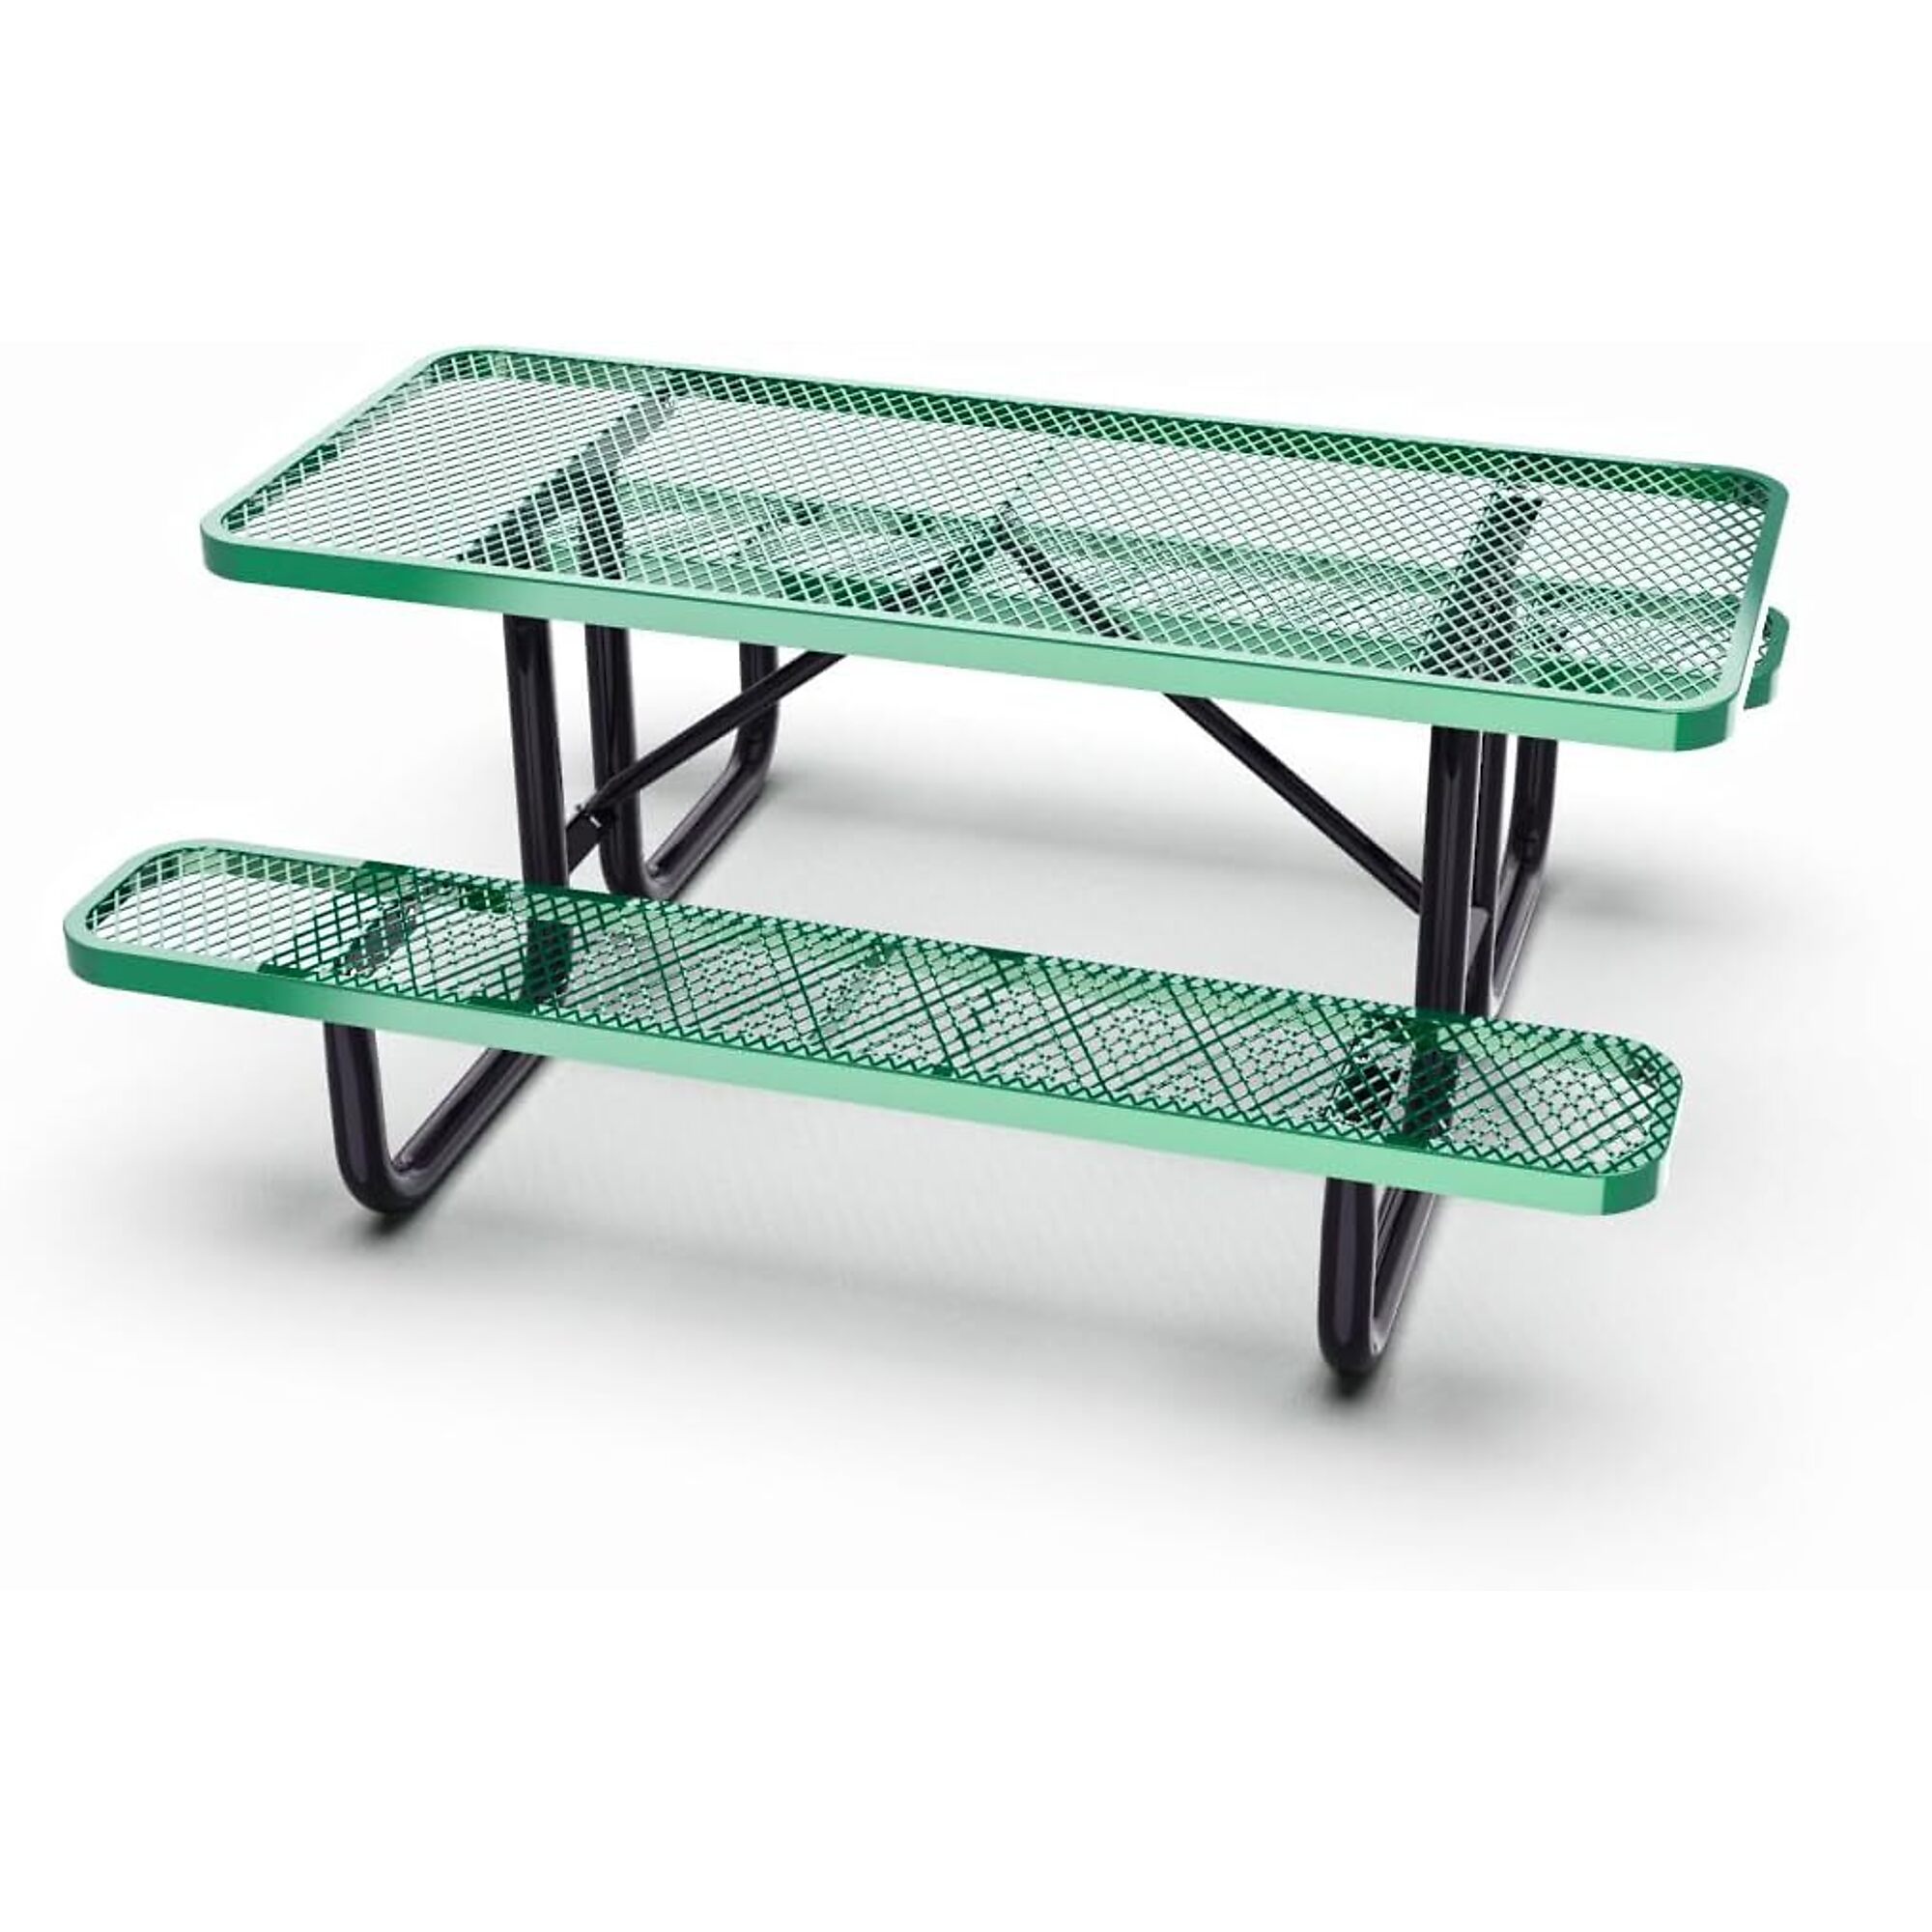 Park Elements, 6ft. thermoplastic coated commercial picnic table, Table Shape Rectangle, Primary Color Green, Height 30 in, Model CD-72PT-GRN